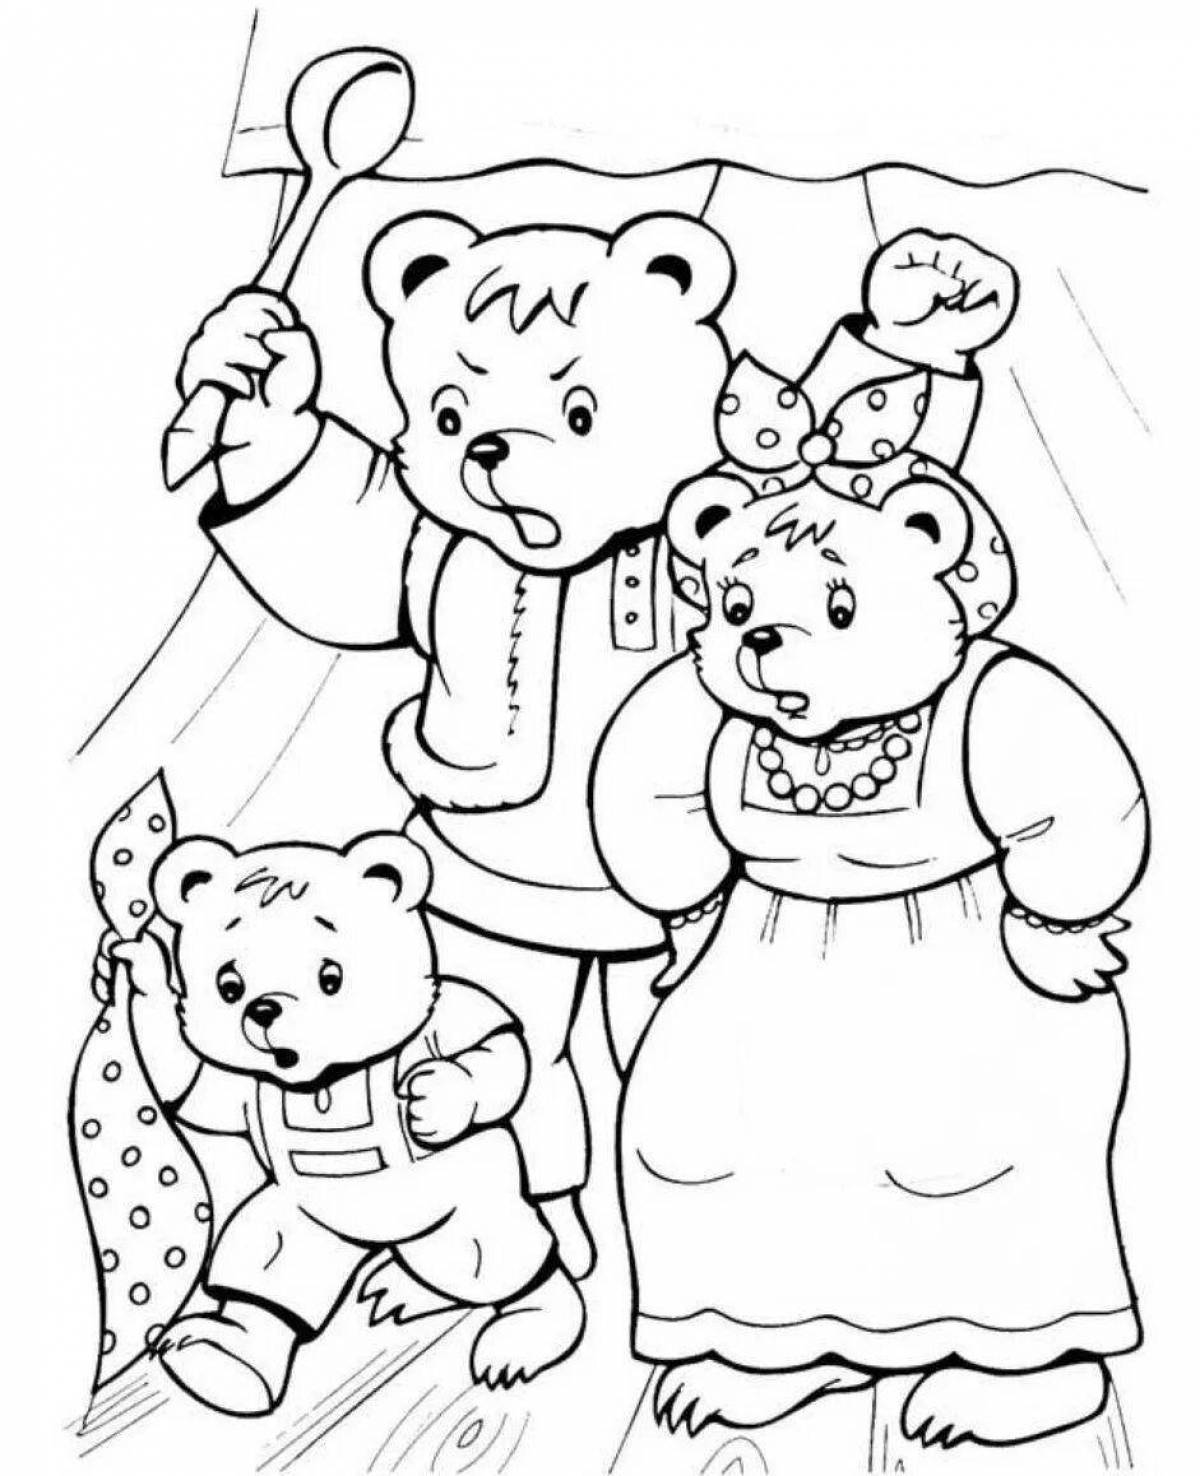 3 bears coloring page for elementary students